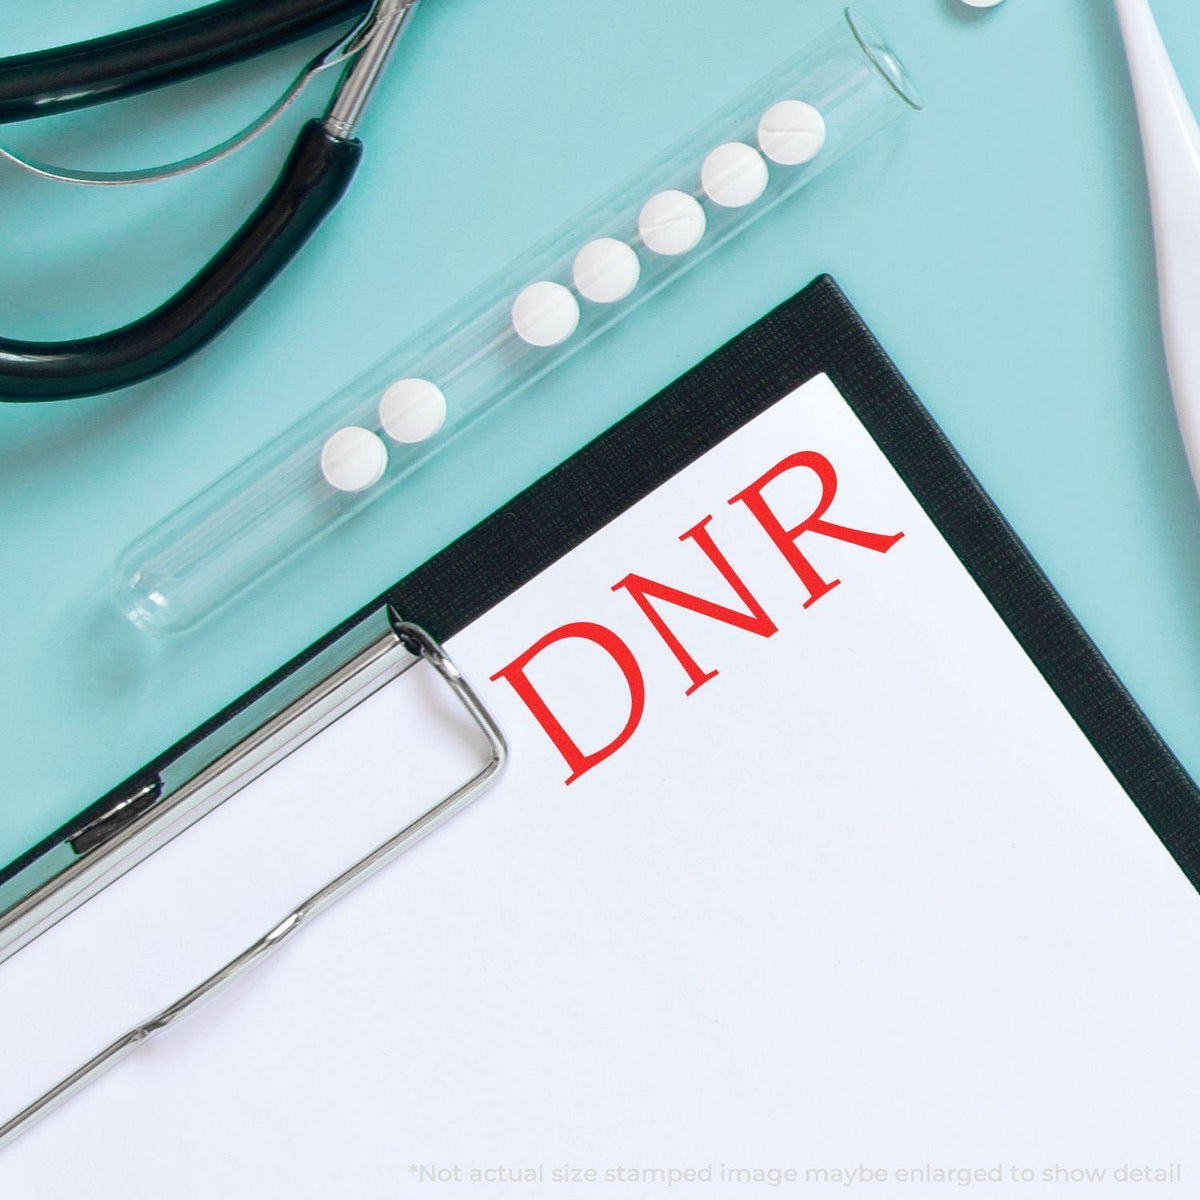 Dnr Medical Rubber Stamp Lifestyle Photo